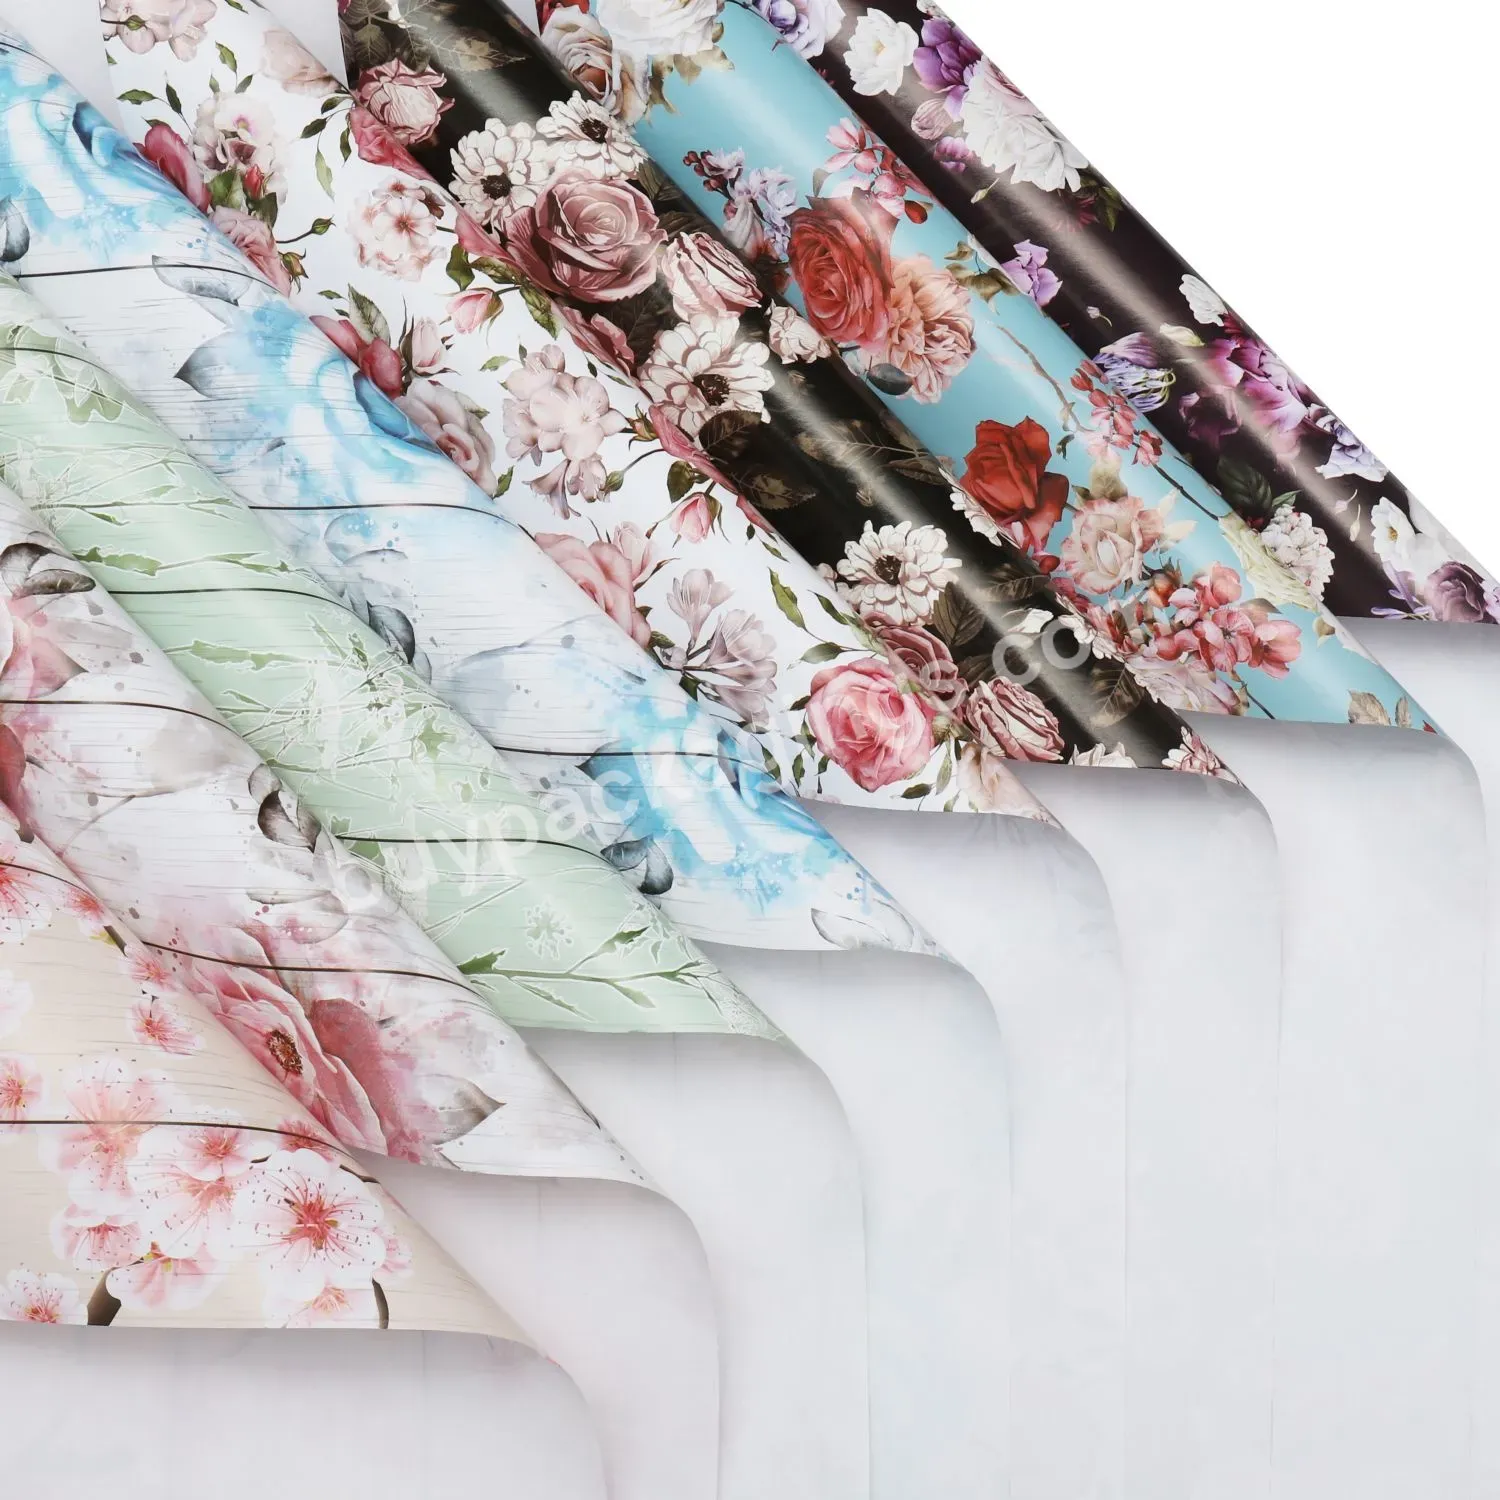 Elegant 50*70cm Watercolor Floral Wrapping Paper For Packing Mother's Day Gift - Buy Elegant 50*70cm Watercolor Floral Wrapping Paper,Wrapping Paper,Packing Mother's Day Gift.